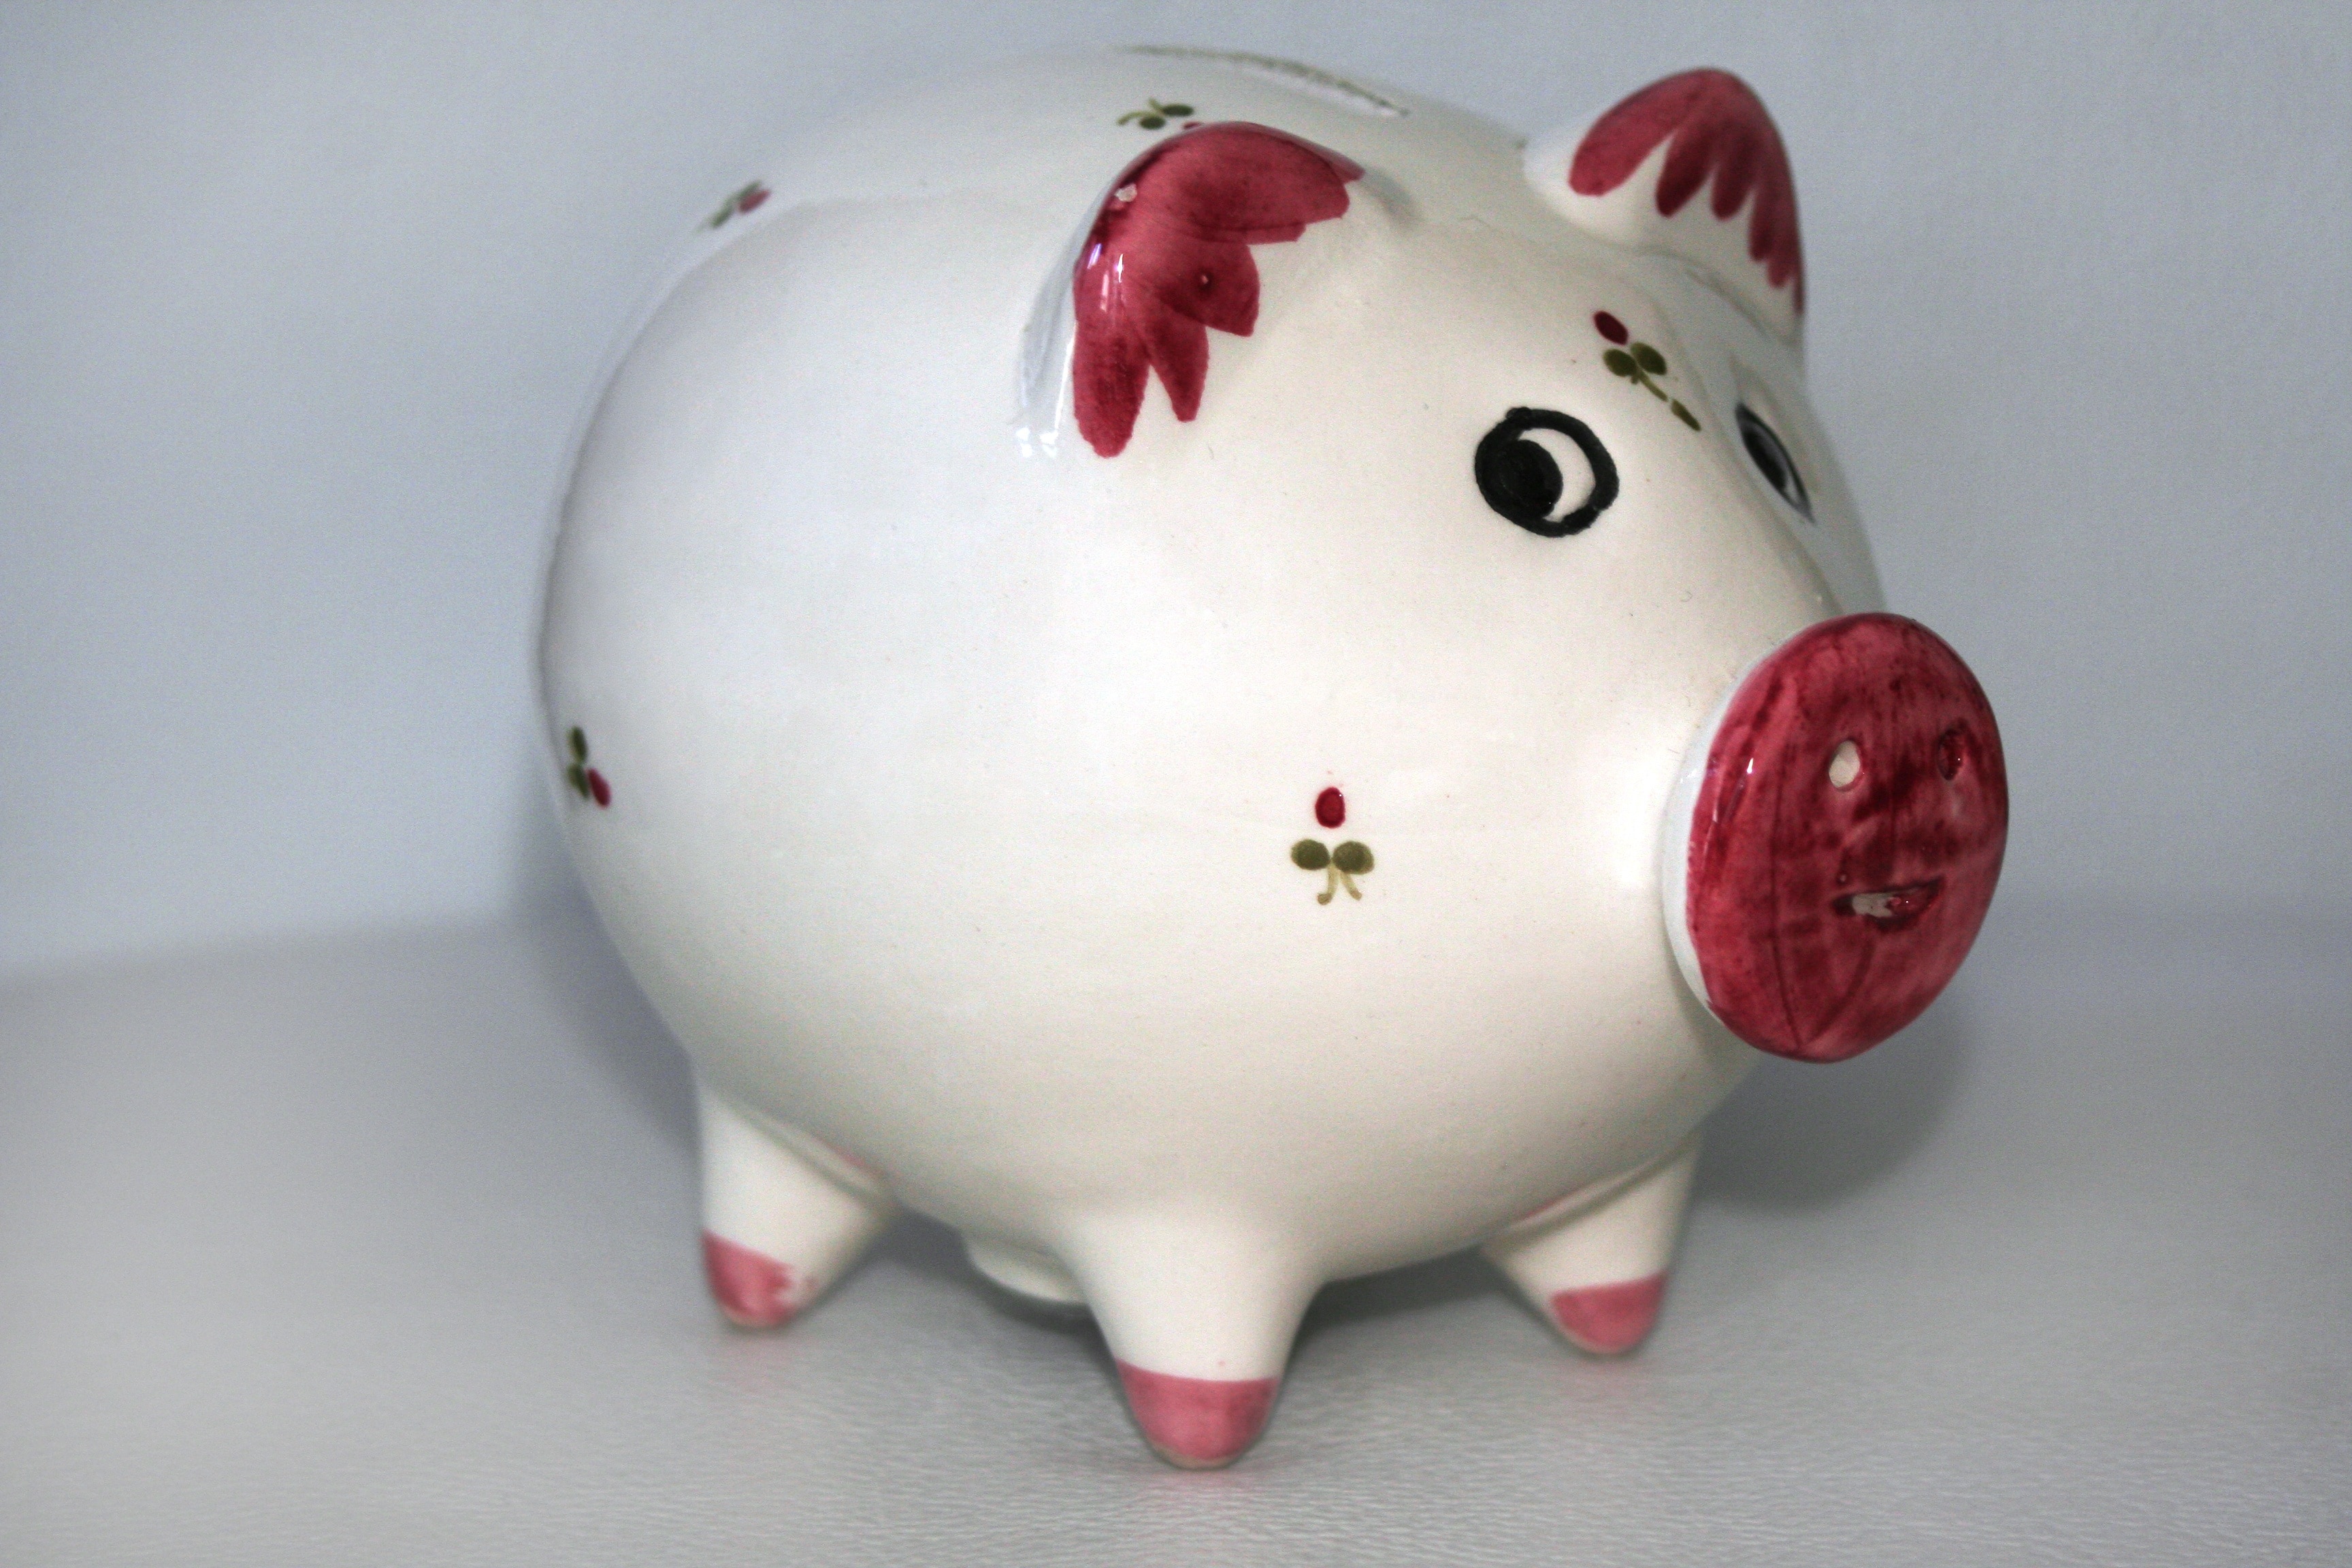 showing red-and-white ceramic pig figurine